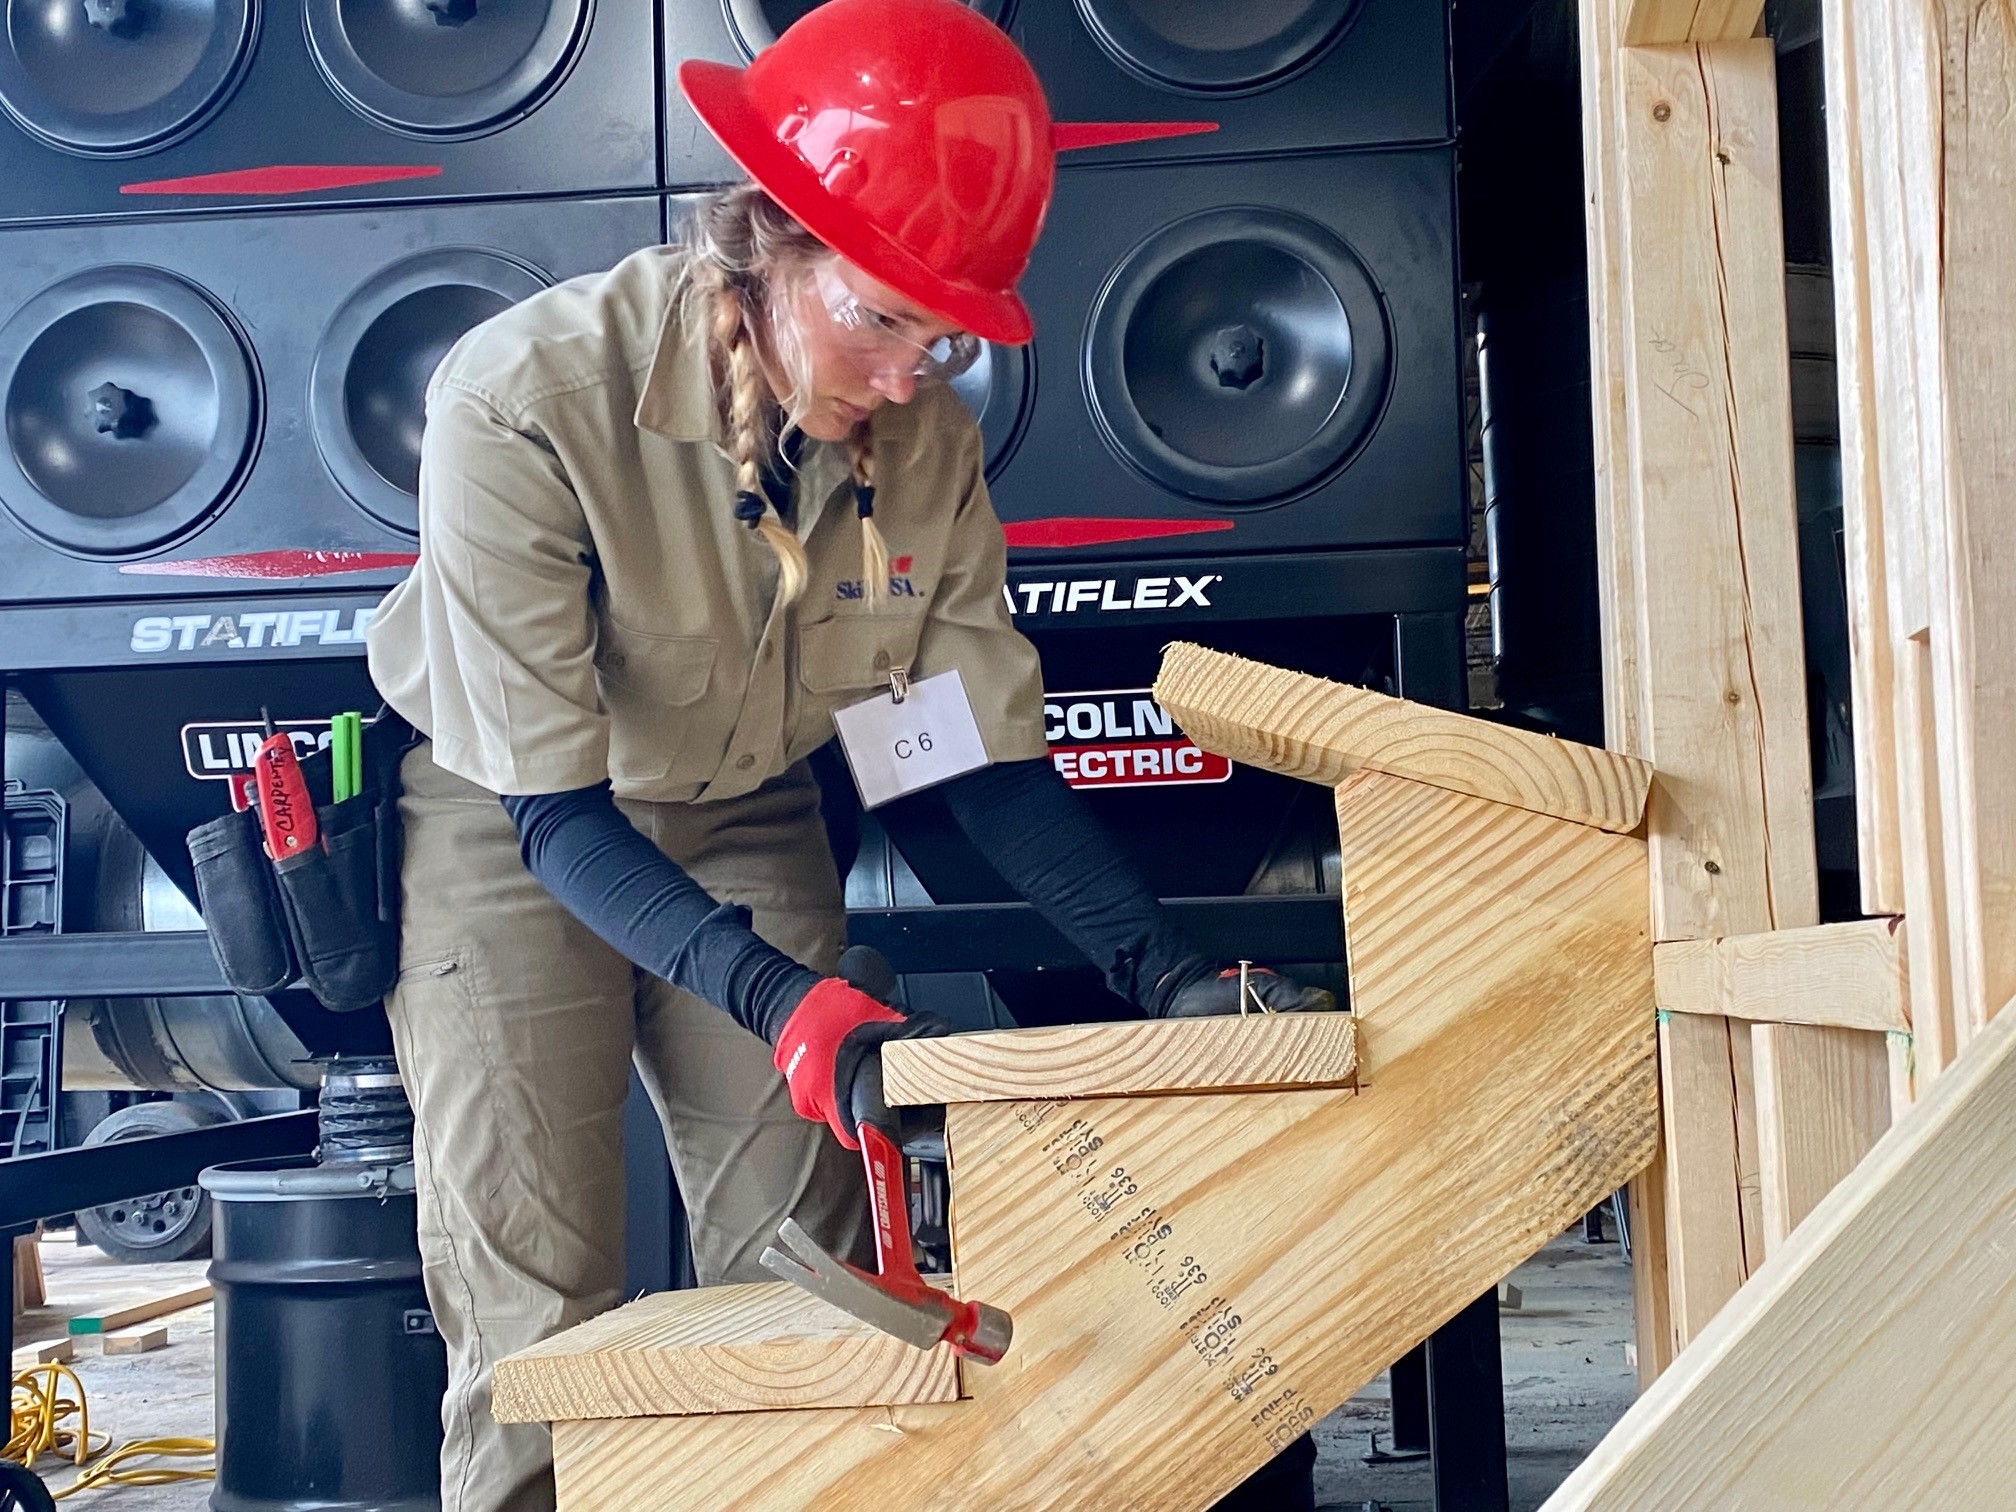 Lorianna Beech of Chattooga High School competes in the carpentry competition at the SkillsUSA regional qualifier held at GNTC’s Walker County Campus on Friday, Dec. 10.